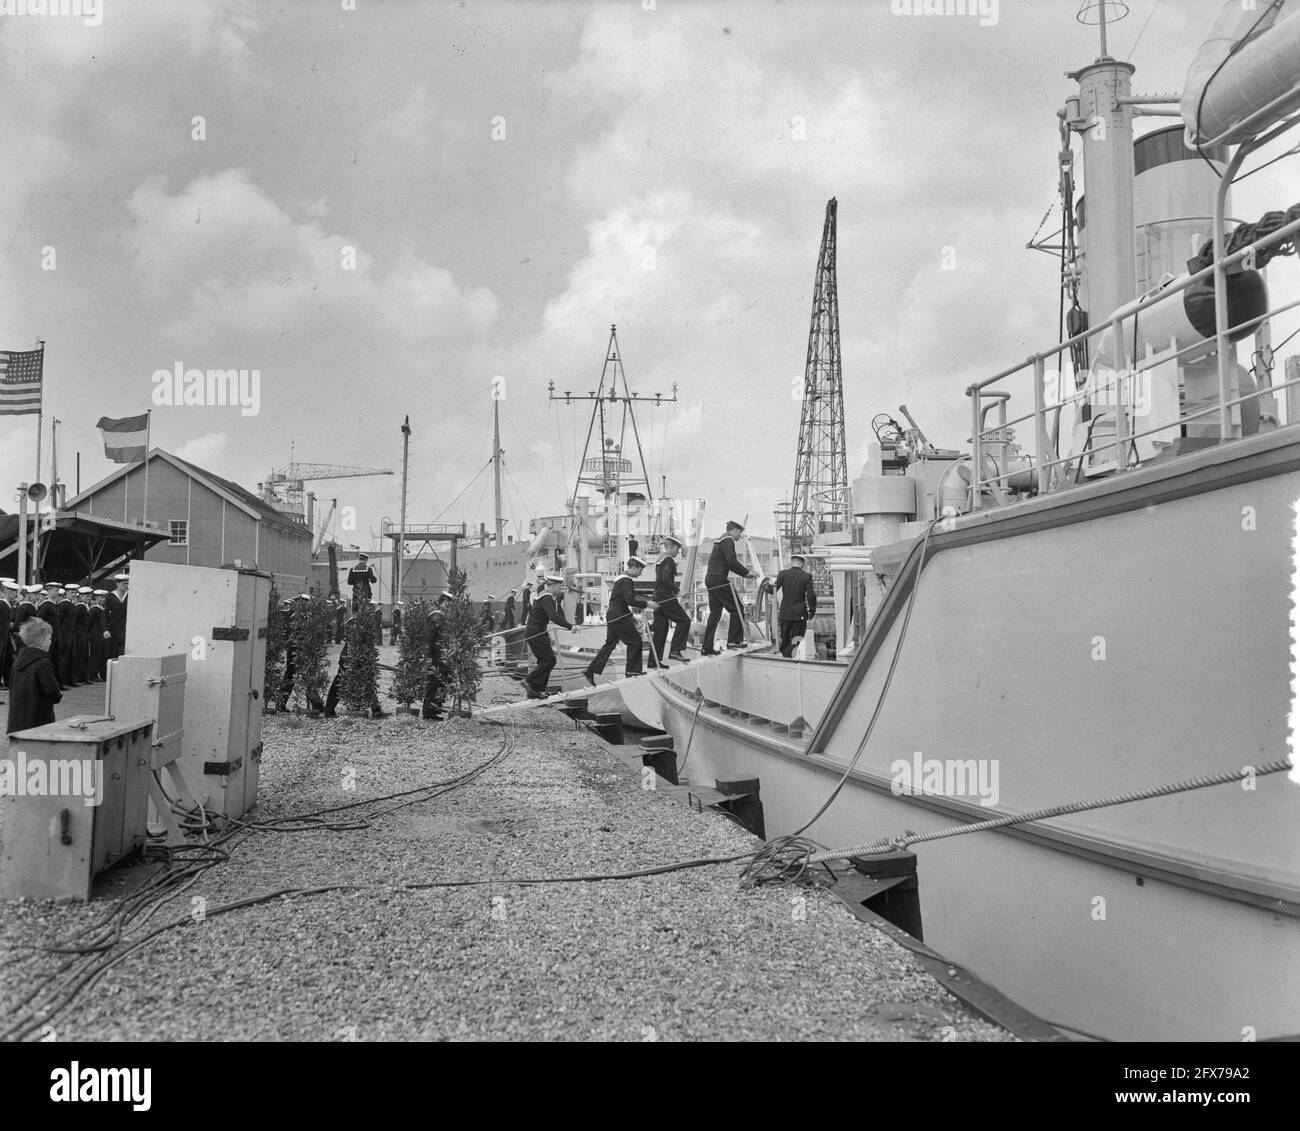 Commissioning minesweepers Abcoude and Naarden Werf Gusto Schiedam, May 18, 1956, Commissioning, MINEENVEGERS, The Netherlands, 20th century press agency photo, news to remember, documentary, historic photography 1945-1990, visual stories, human history of the Twentieth Century, capturing moments in time Stock Photo